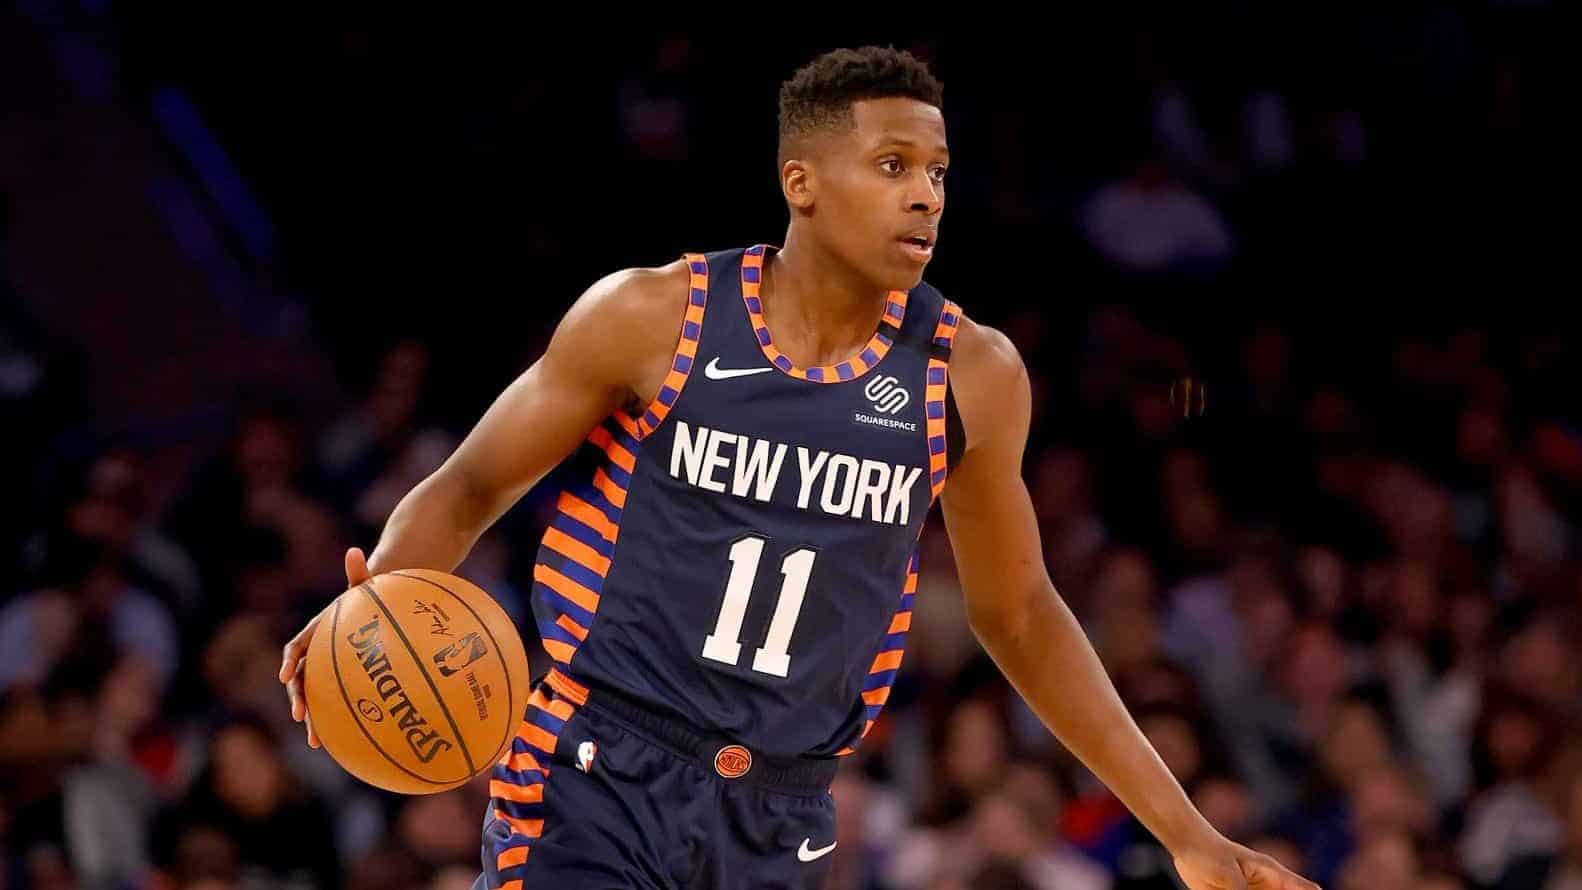 NEW YORK, NEW YORK - JANUARY 16: Frank Ntilikina #11 of the New York Knicks takes the ball in the second quarter against the Phoenix Suns at Madison Square Garden on January 16, 2020 in New York City.NOTE TO USER: User expressly acknowledges and agrees that, by downloading and or using this photograph, User is consenting to the terms and conditions of the Getty Images License Agreement.